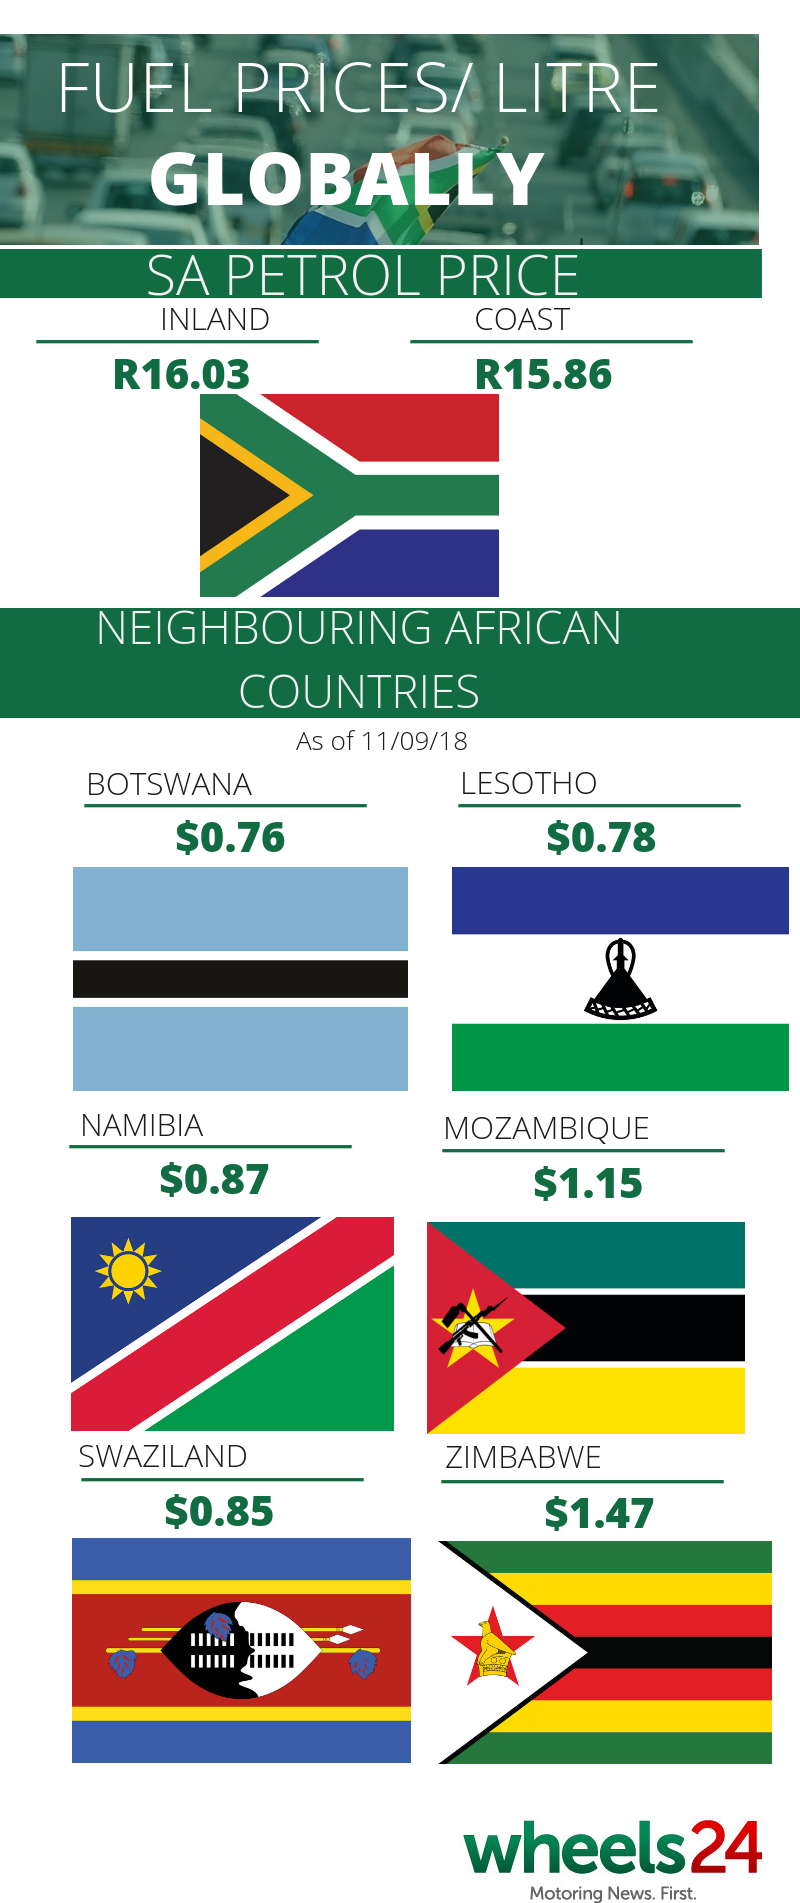 SEE Fuel prices in Africa Southern African neighbours pay far less